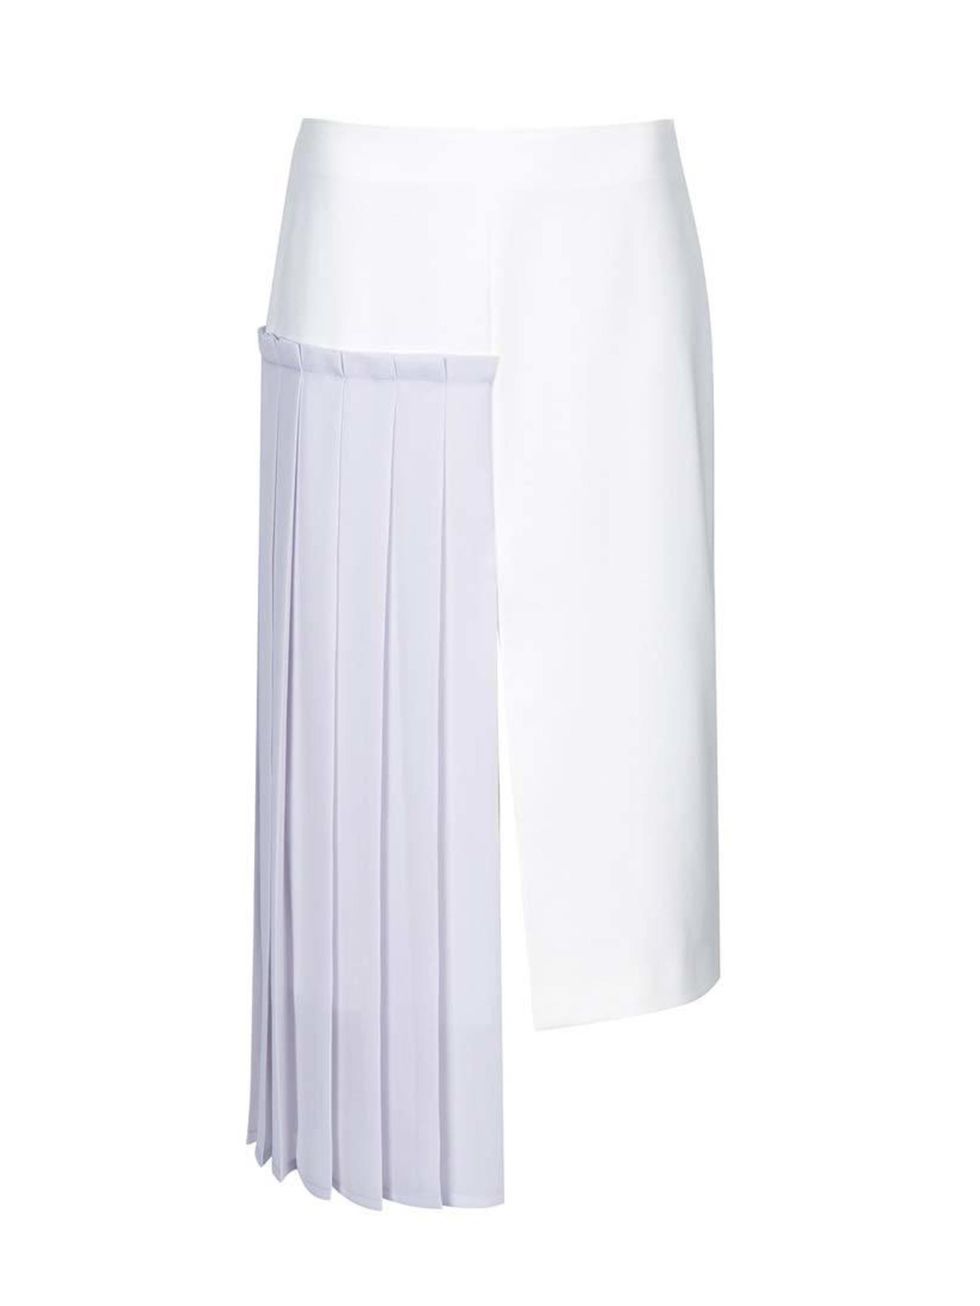 <p>Editorial Assistant Gillian Brett will pair this hybrid skirt with a cashmere knit and ankle boots.</p>

<p> </p>

<p><a href="http://www.topshop.com/en/tsuk/product/new-in-this-week-2169932/new-in-this-week-493/hybrid-pleat-pencil-skirt-by-boutique-33